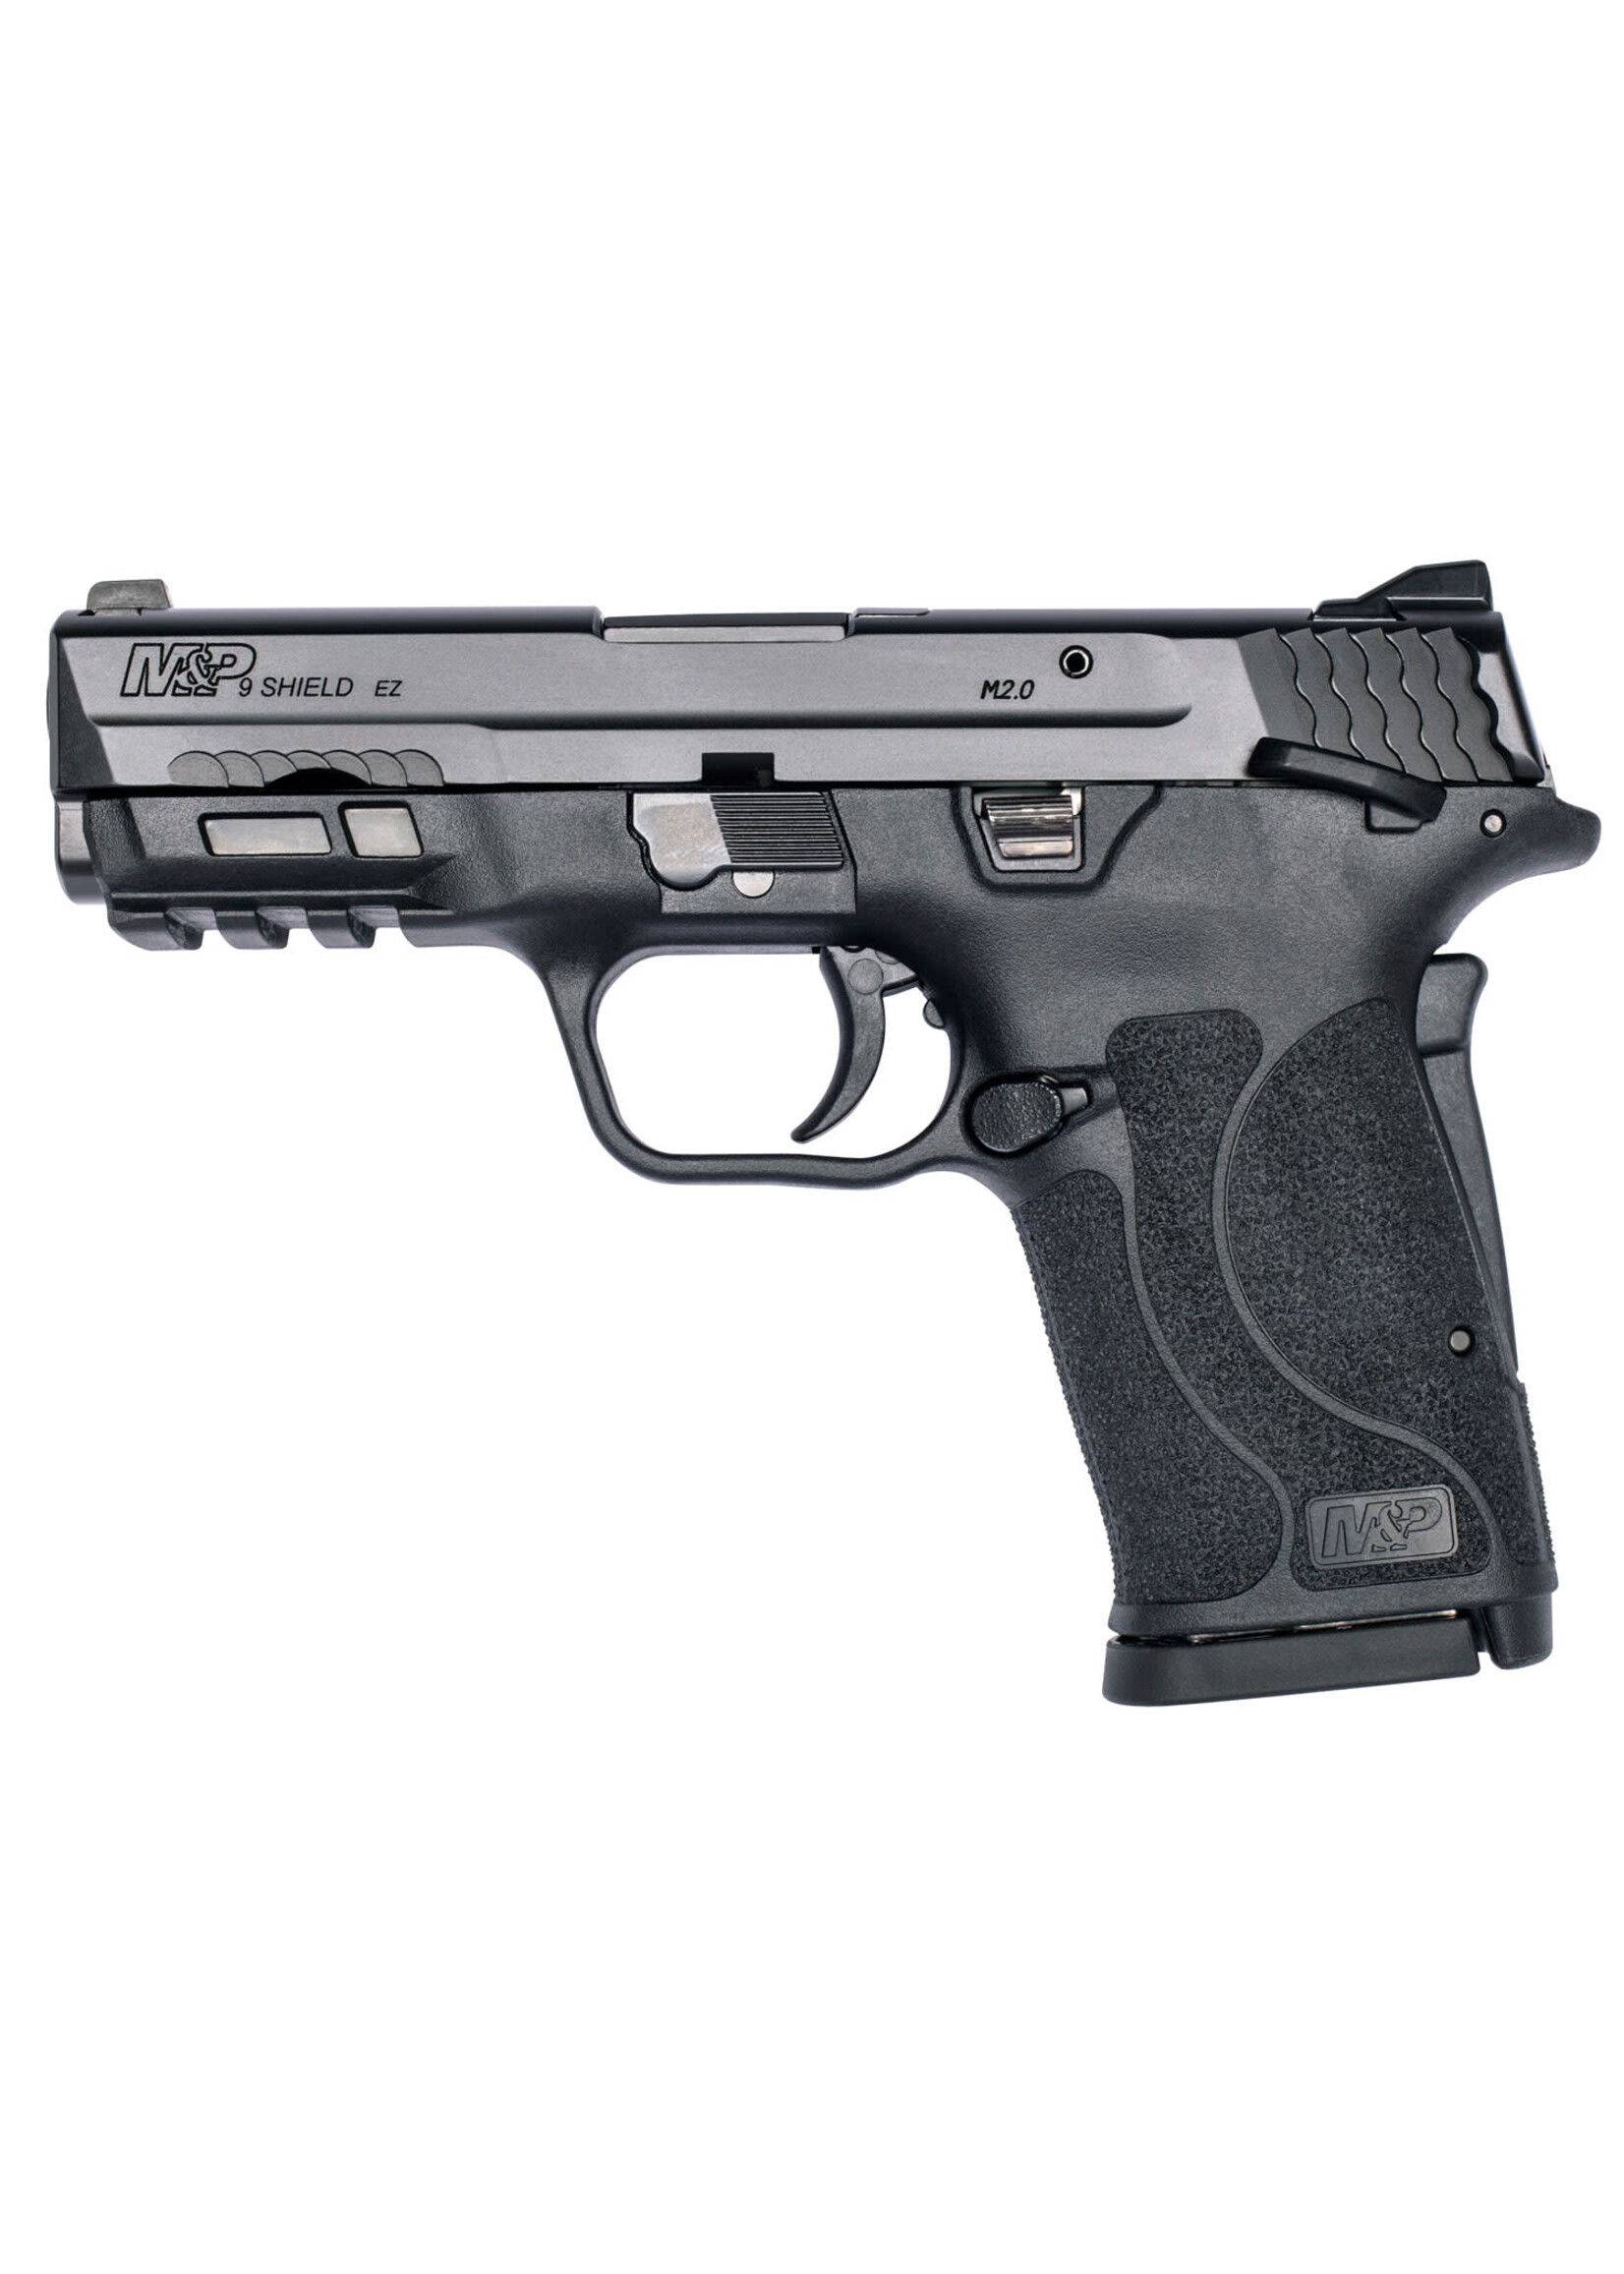 Smith and Wesson (S&W) Smith & Wesson 12436 M&P Shield EZ M2.0 Compact Slim 9mm Luger 8+1 3.67" Black Armornite Barrel & Serrated Slide, Matte Black Polymer Frame w/Picatinny Rail Black Polymer Grips Right Hand